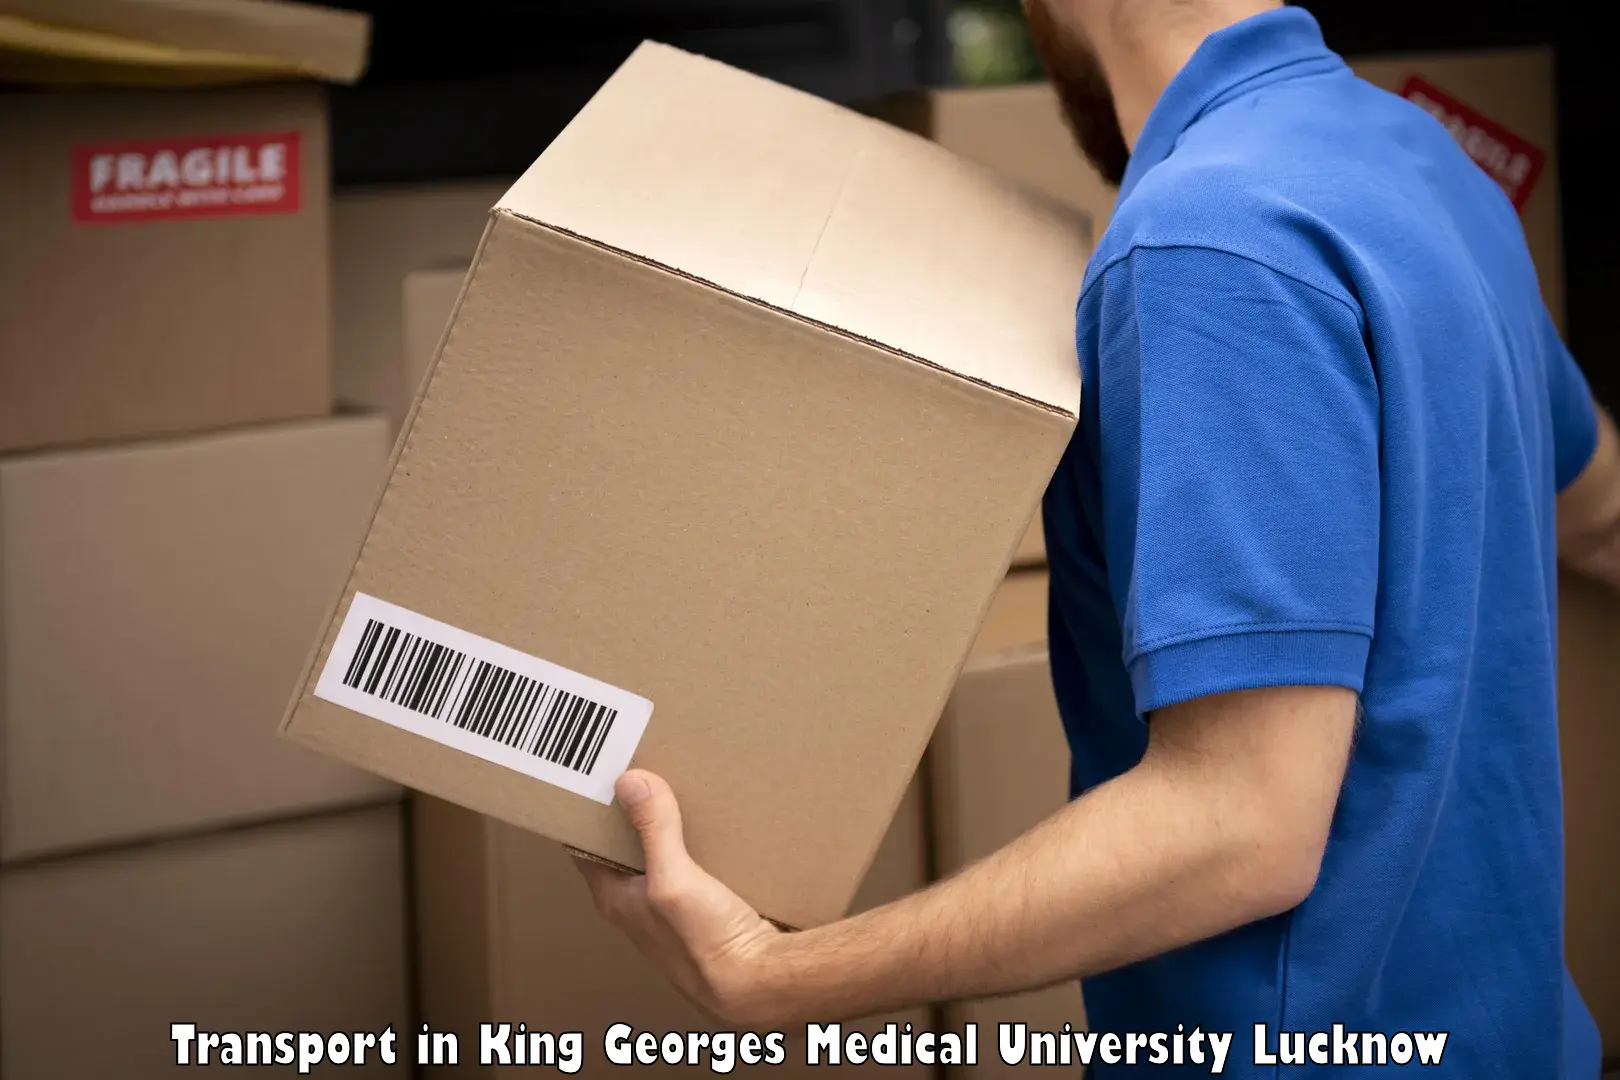 Vehicle transport services in King Georges Medical University Lucknow